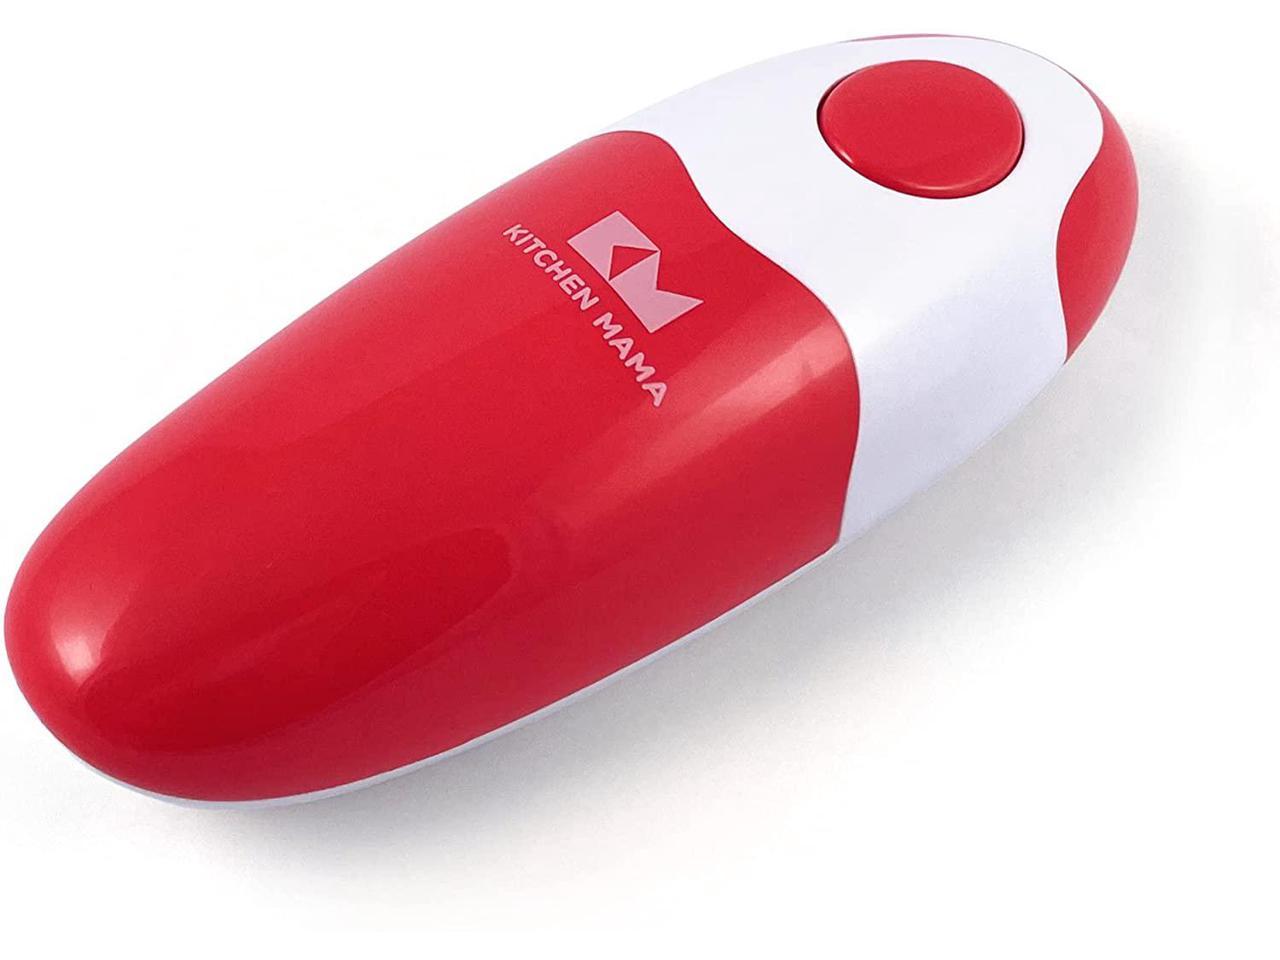 Battery Operated & Portable Smooth-Edge Cut Perfect for Senior with Arthritis Kitchen Mama Automatic Electric Can Opener Ergonomic Easy to Use and Hands-Free 